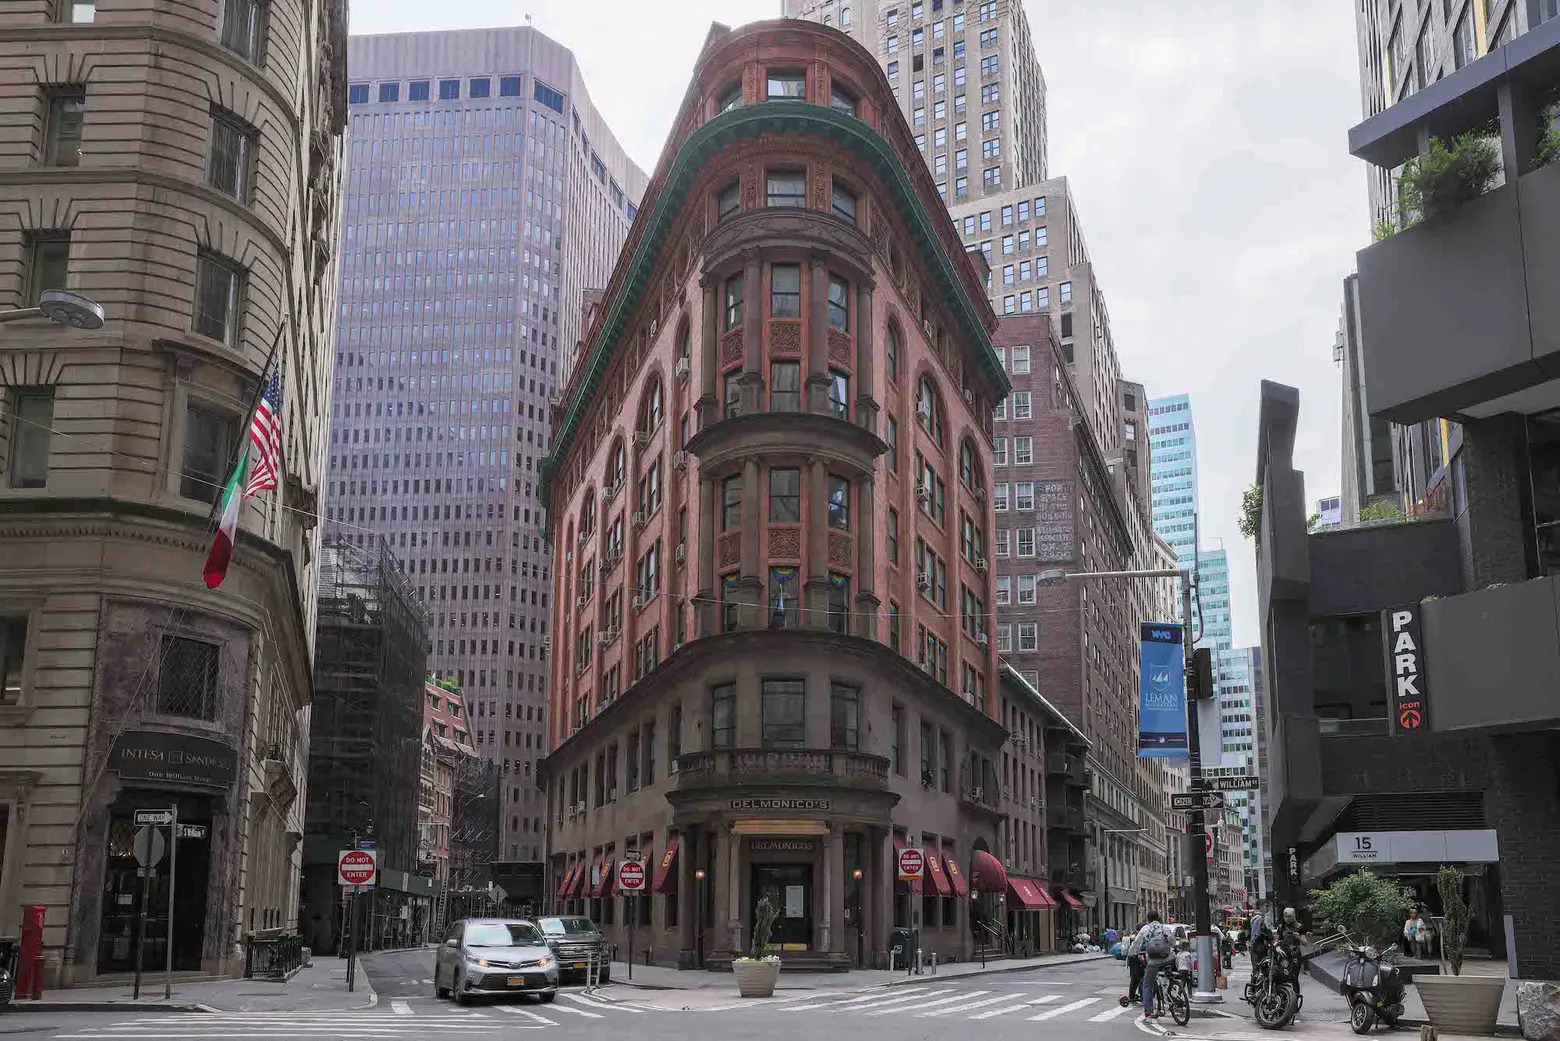 Historic NYC restaurant Delmonico’s reopening in the Financial District